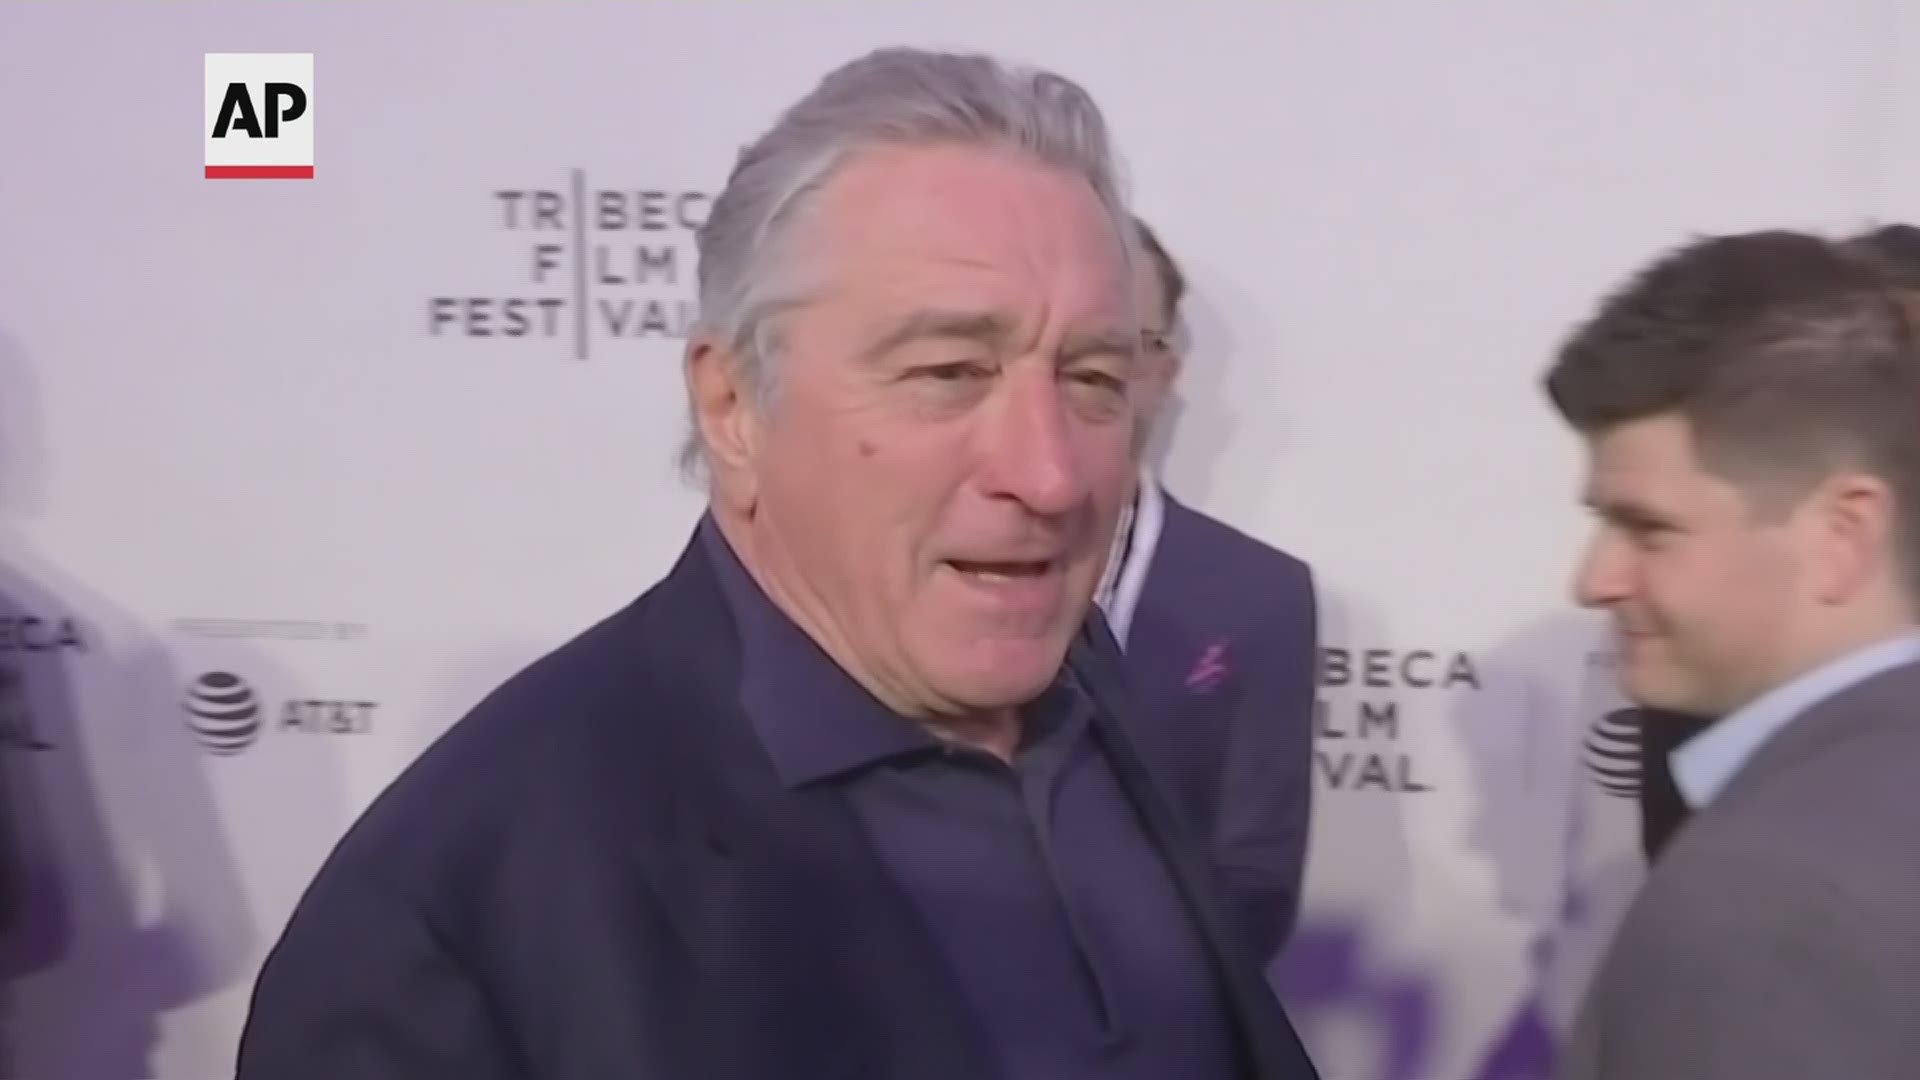 A leg injury may keep Robert De Niro from celebrating the 20th Anniversary of the Tribeca Film Festival.